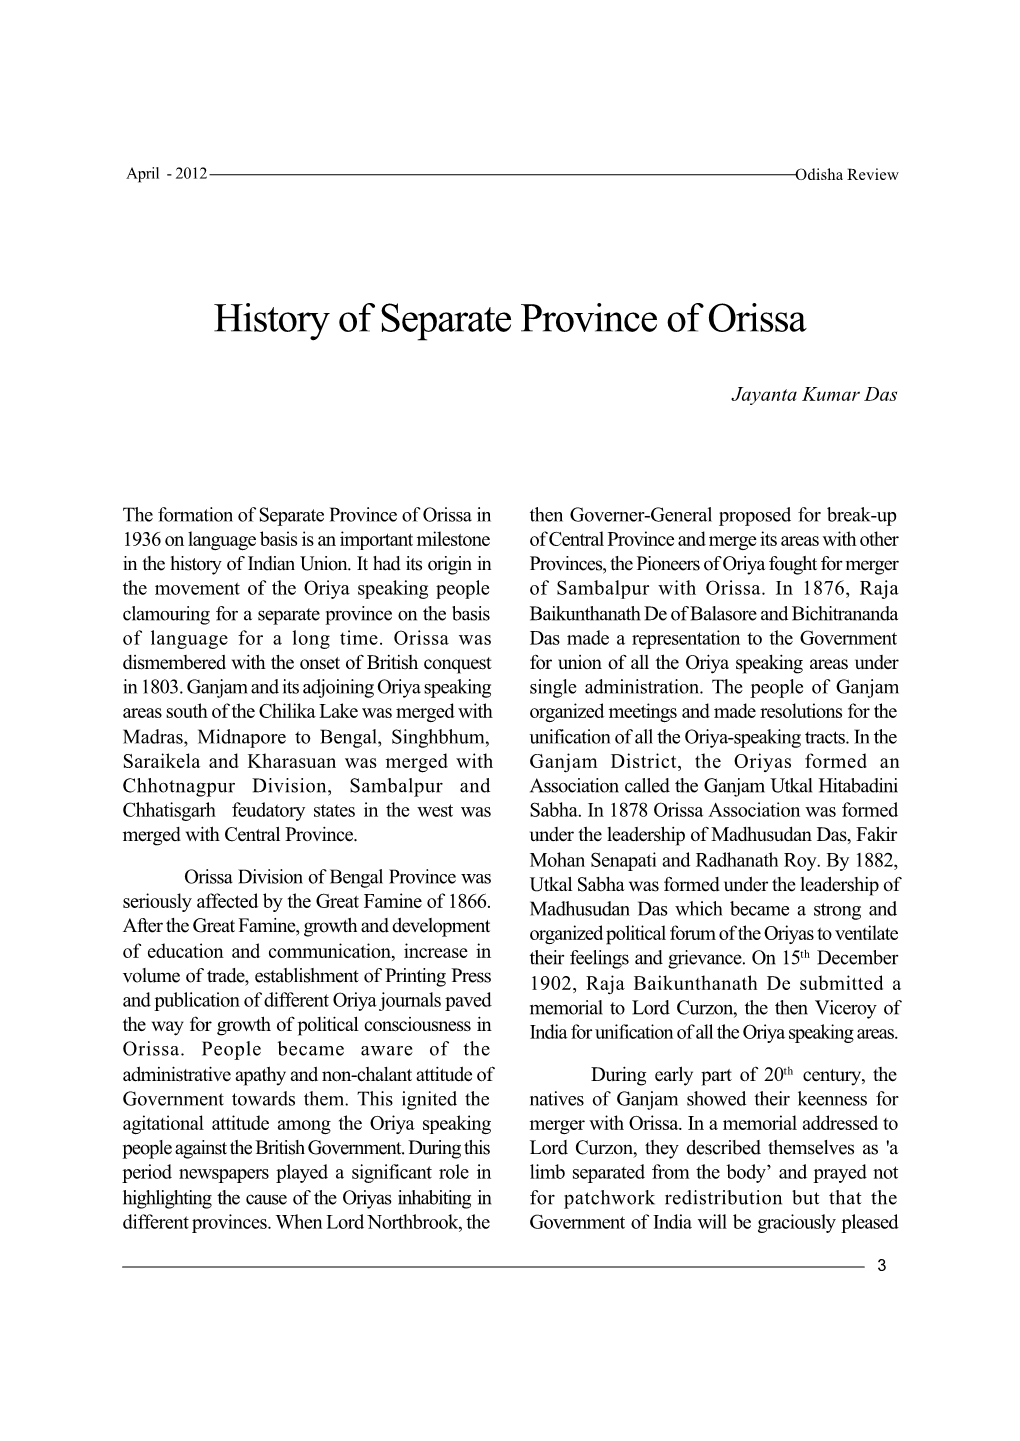 History of Separate Province of Orissa